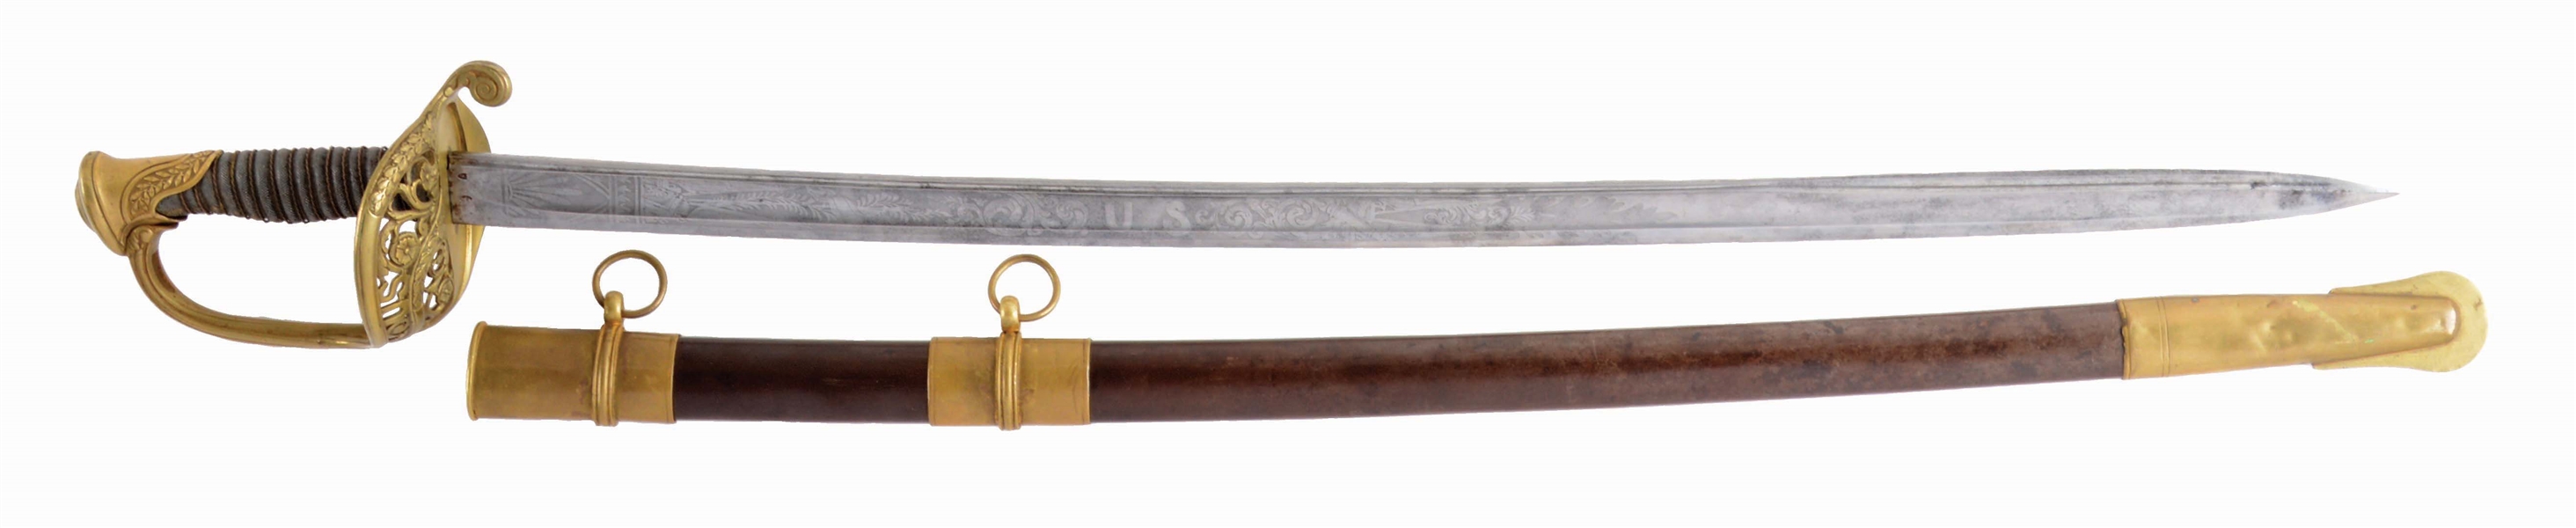 A GOOD IMPORTED 1850 STAFF & FIELD OFFICERS SABER WITH SHEATH.